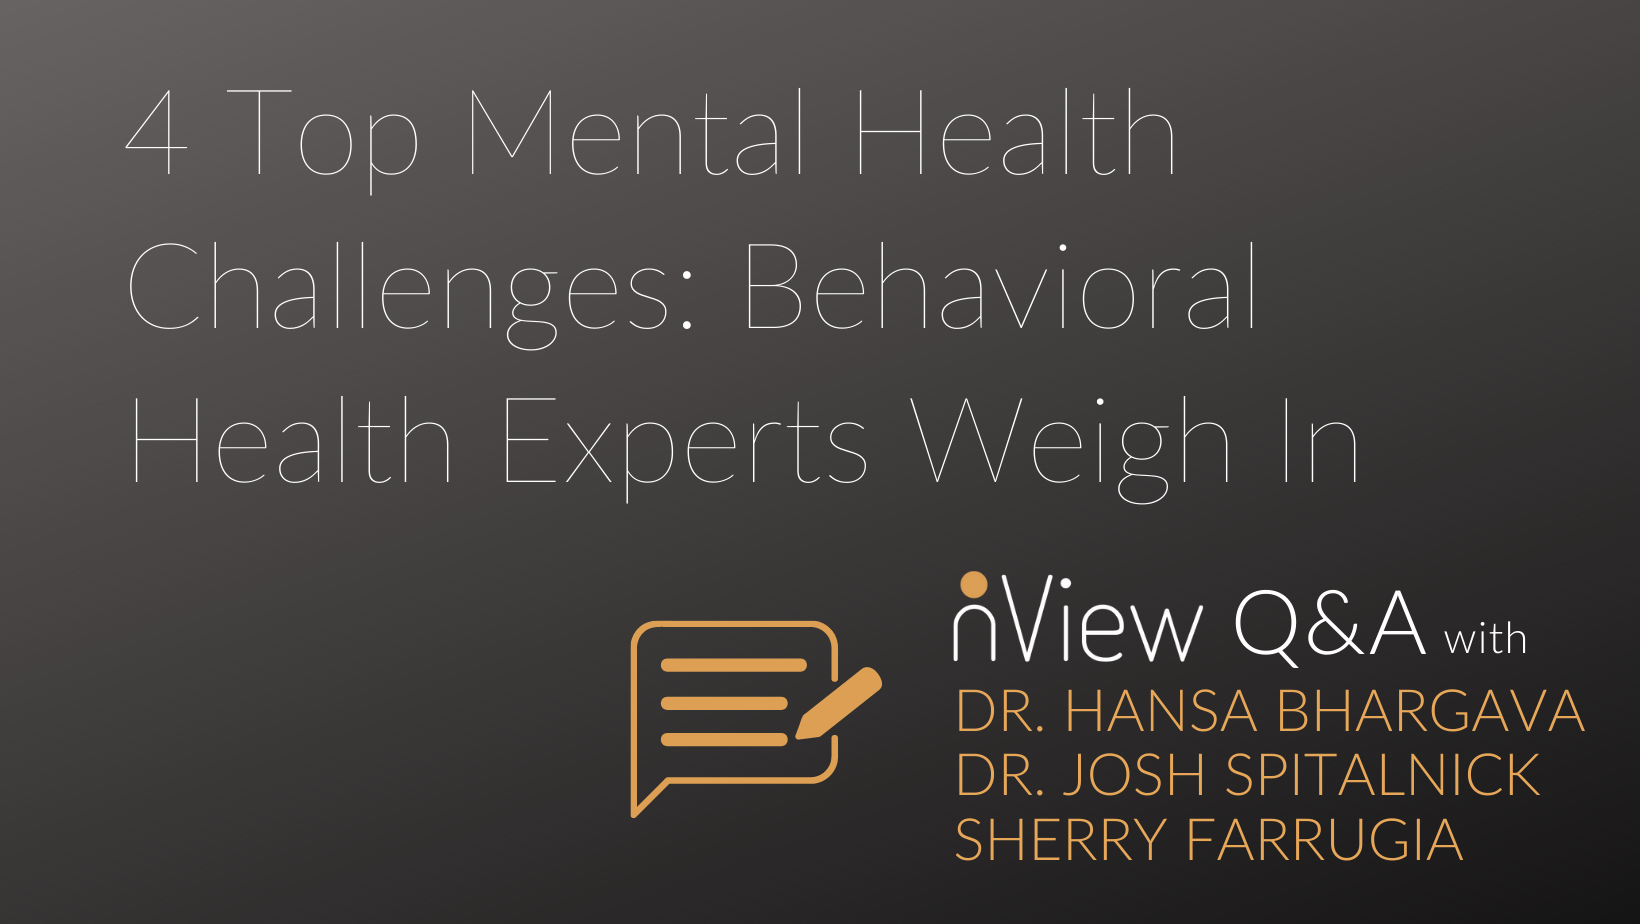 4 Top Mental Health Challenges: Behavioral Health Experts Weigh In